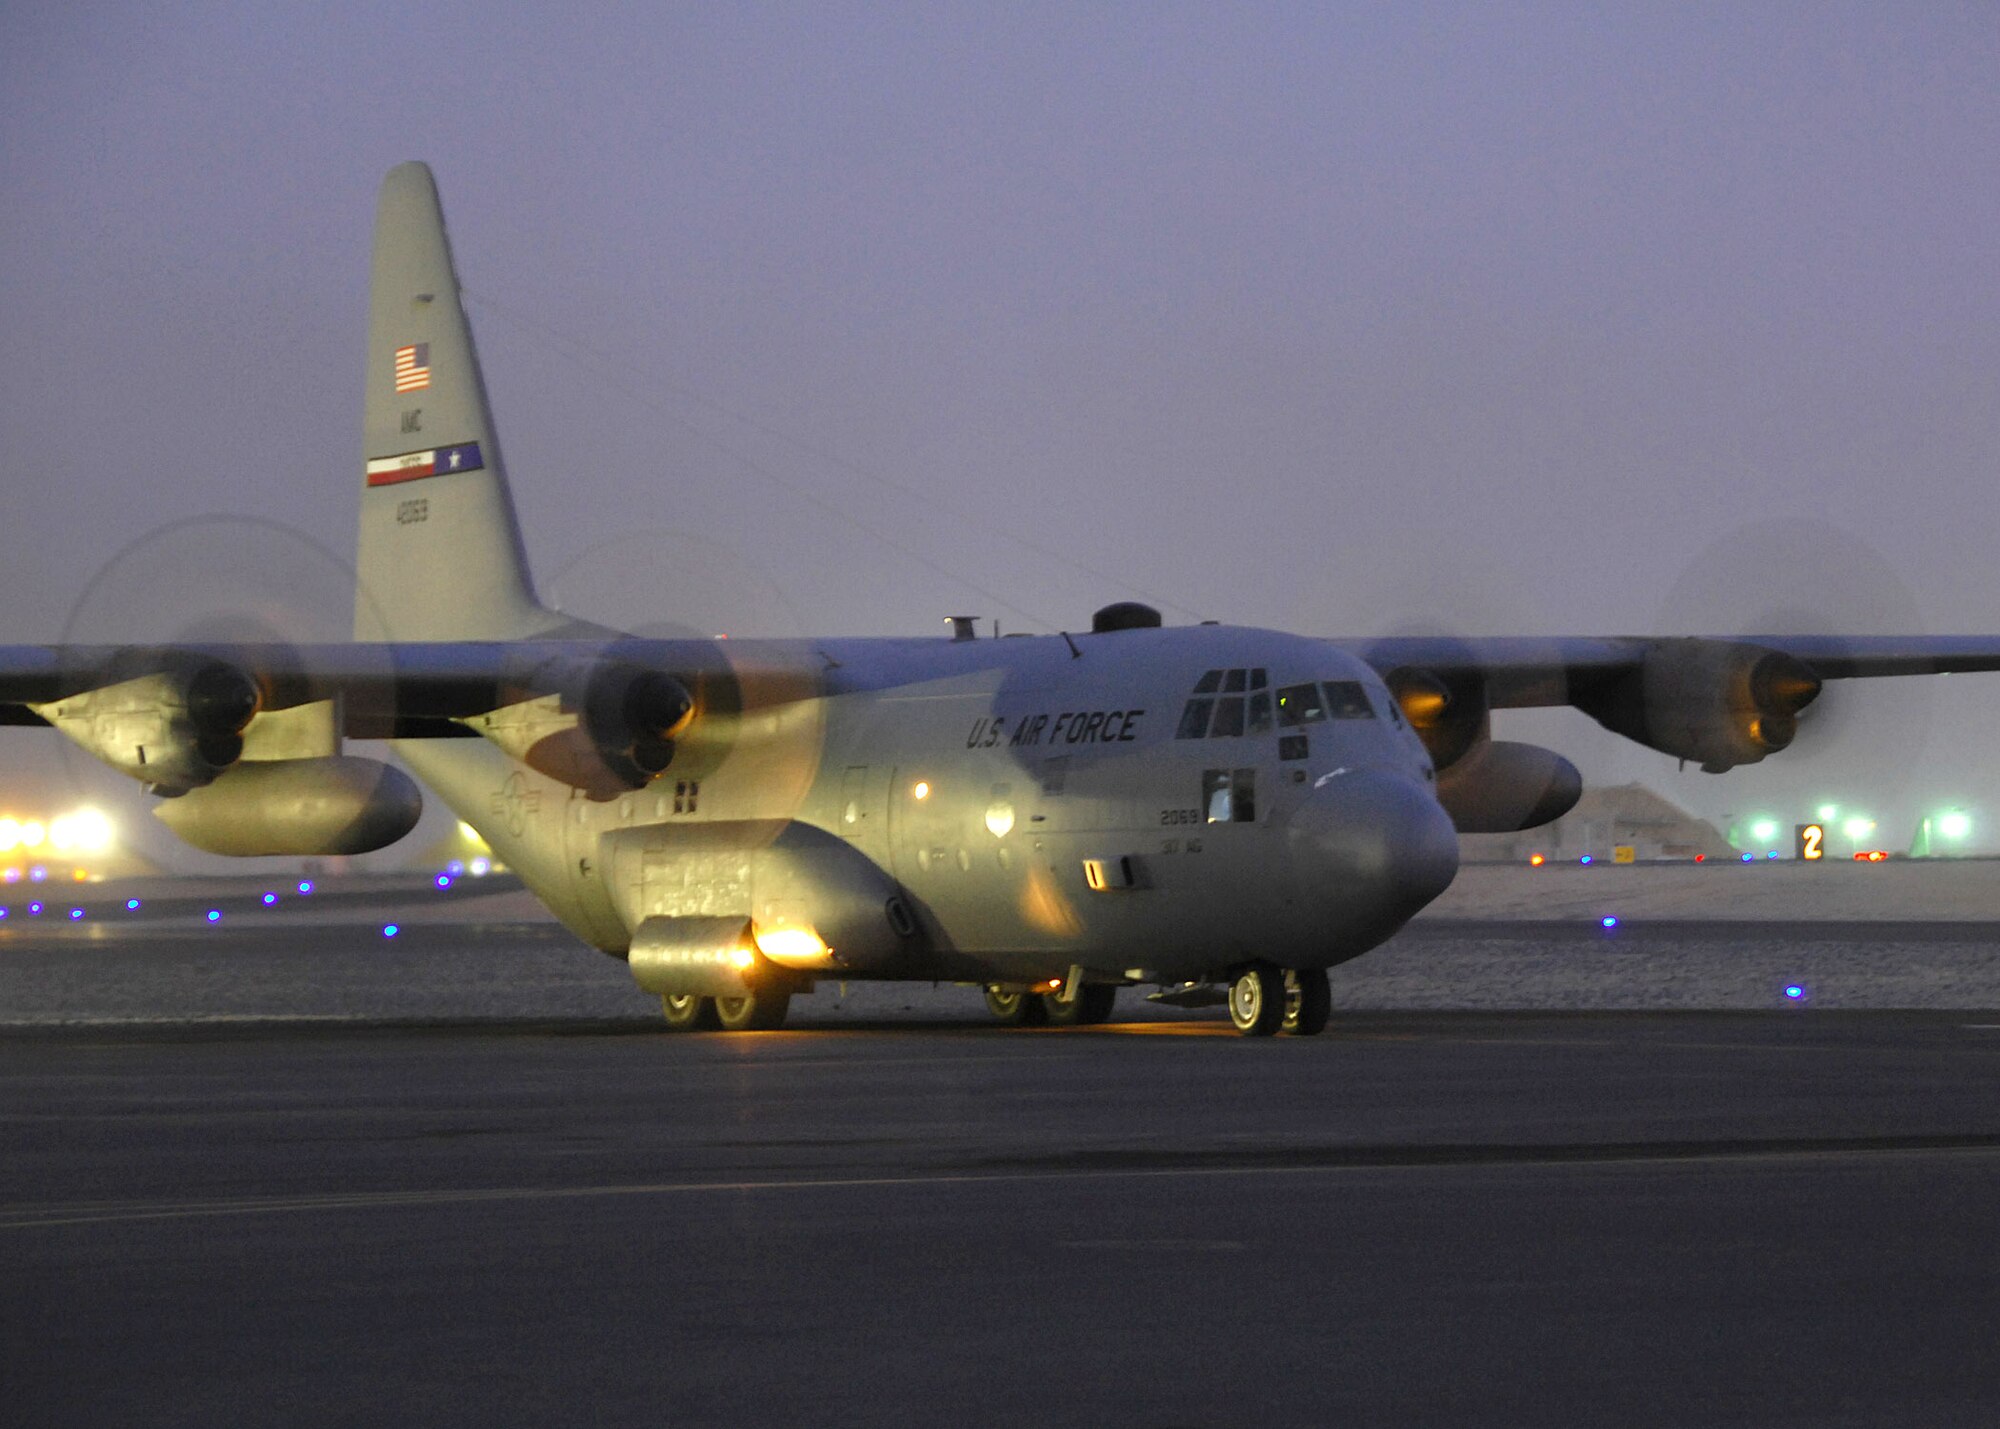 A C-130 Hercules prepares to depart a Southwest Asia air base on a sortie en route to Iraq. The C-130s are vital to transporting passengers and cargo, providing intra-theater heavy airlift and supporting operations throughout Afghanistan, Iraq and the Horn of Africa. The C-130 is assigned to the 386th Expeditionary Operations Group. (U.S. Air Force photo/Tech. Sgt. Raheem Moore)